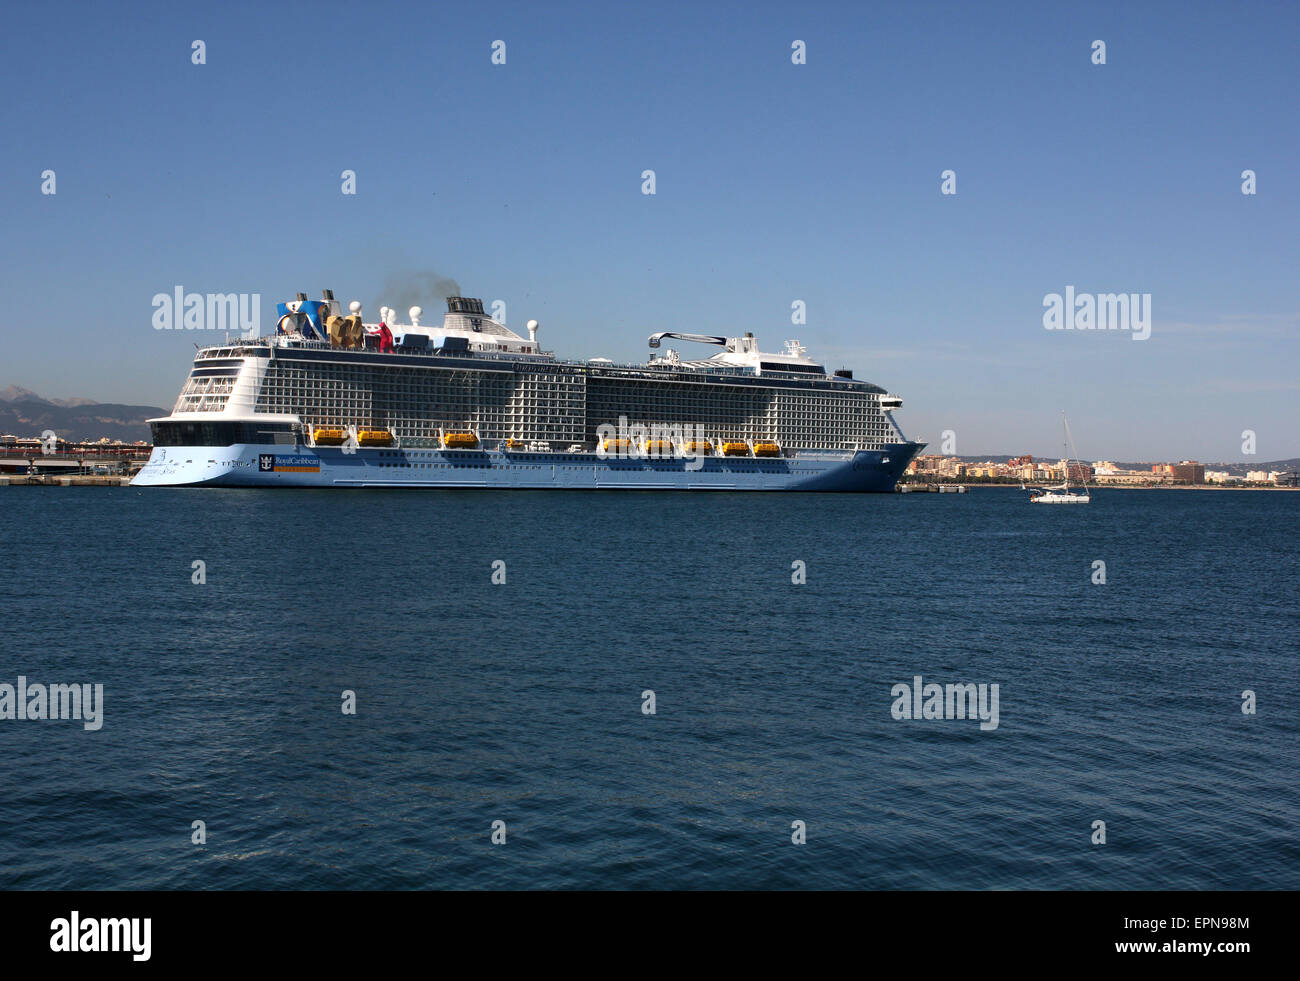 Mega Cruise ship “QUANTUM OF THE SEAS” ( 347.08 mtrs long - launched in 2014 - 4,100 passengers - 18 decks ) - Palma Stock Photo